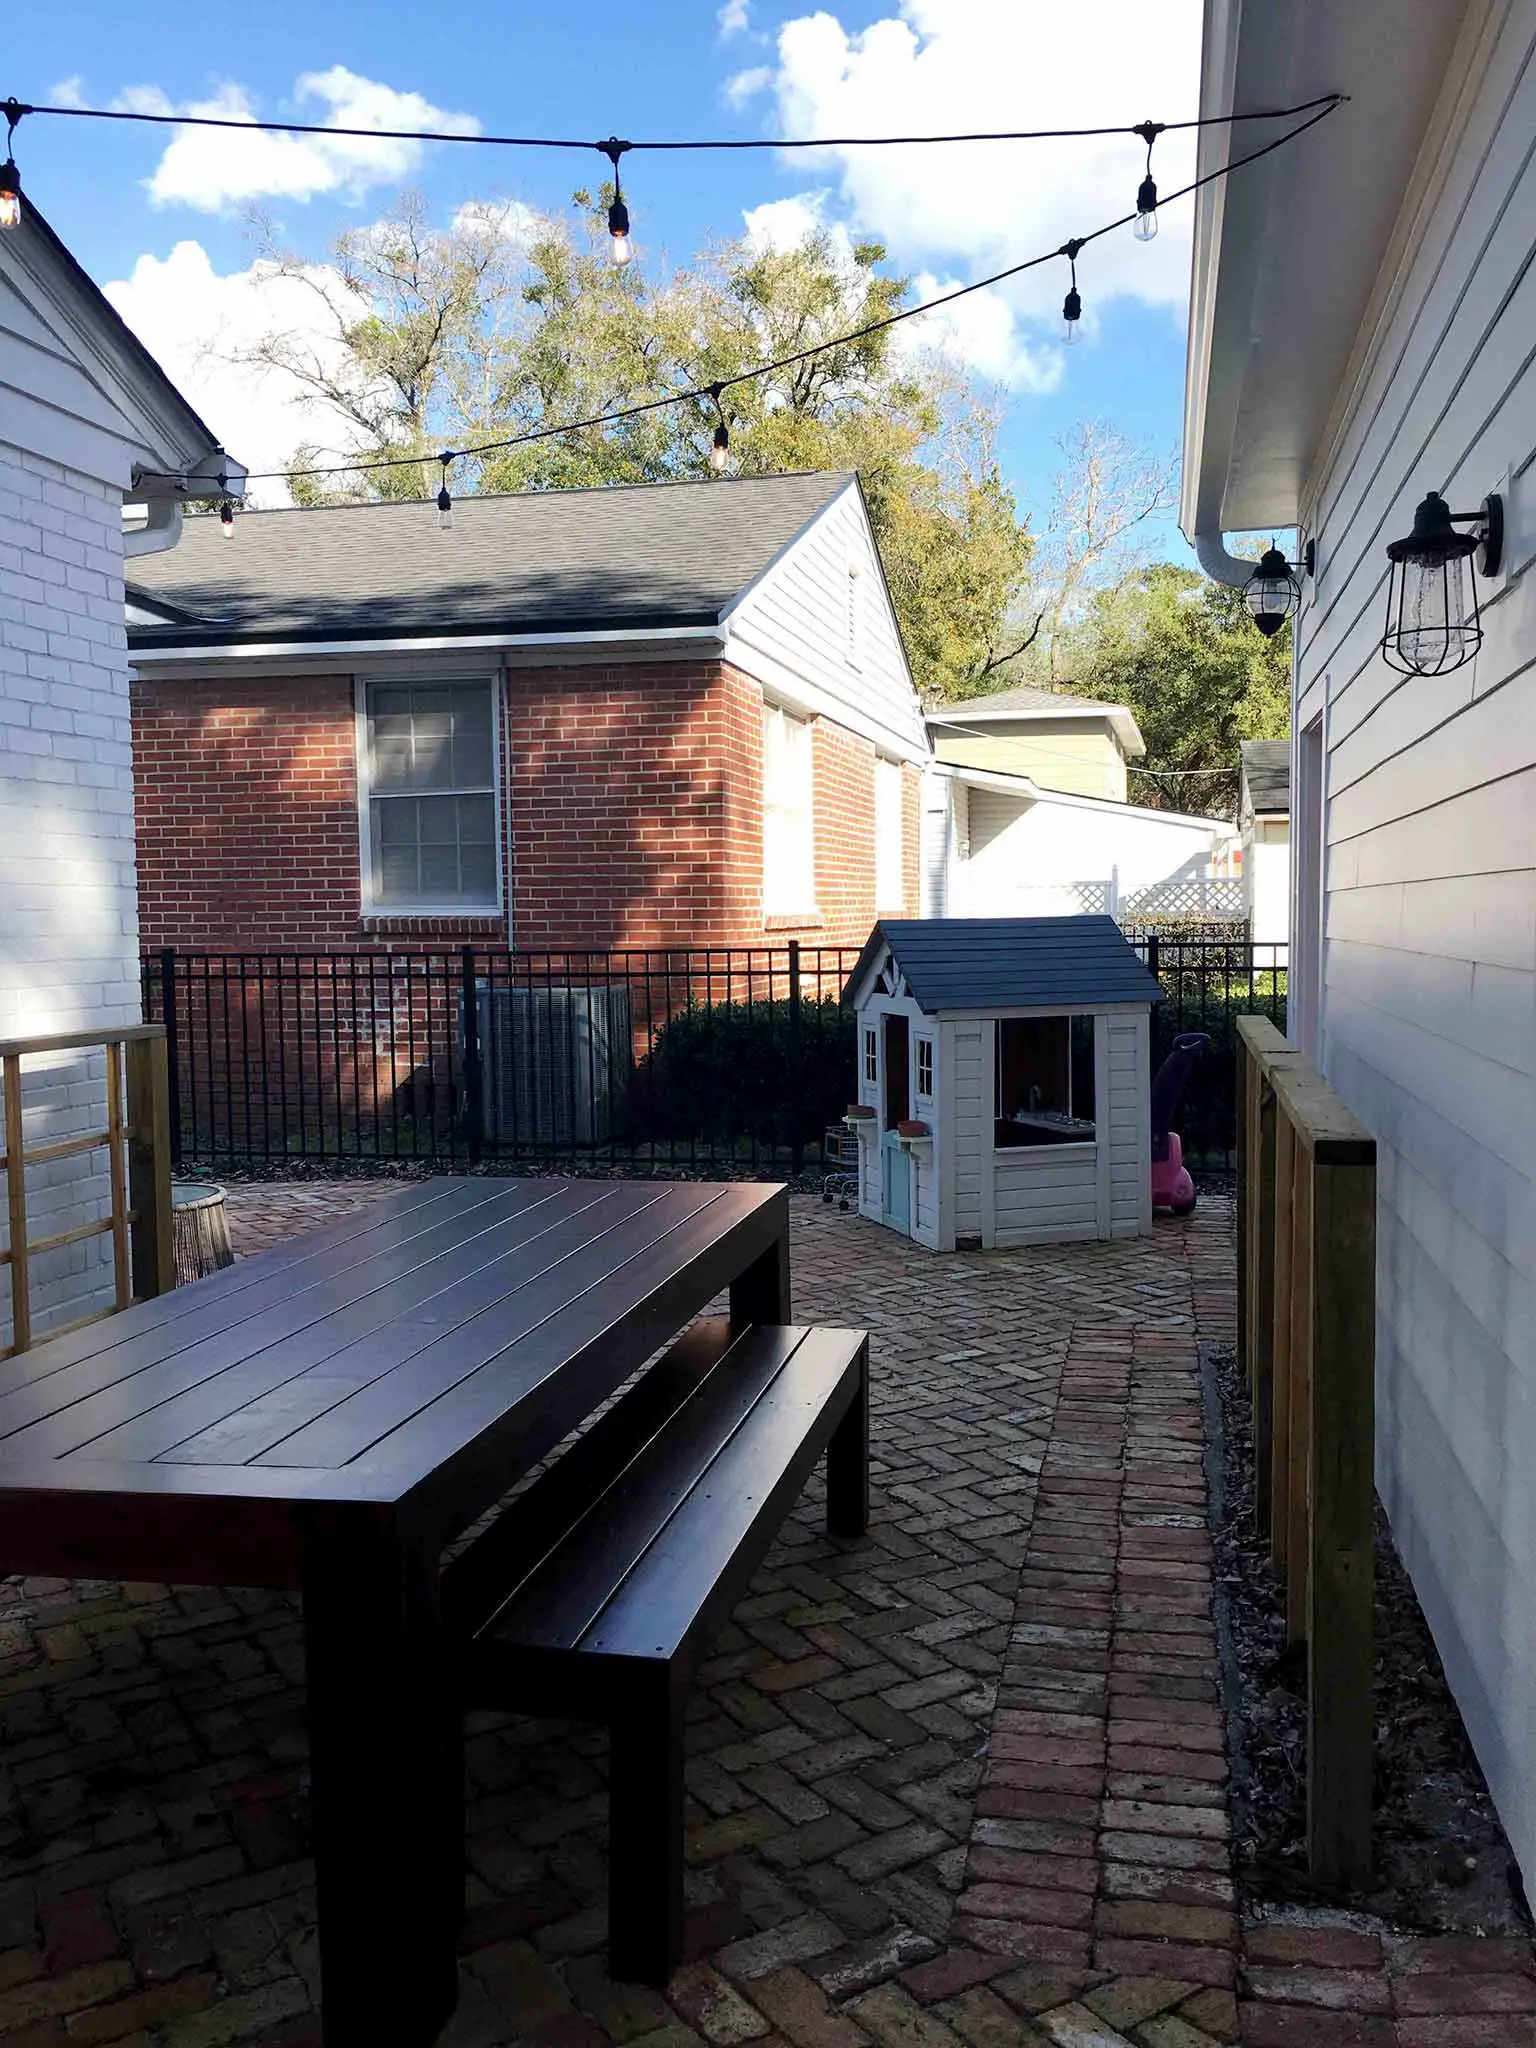 Dining area with reclaimed brick paver patio - How we planned our backyard space - That Homebird Life Blog